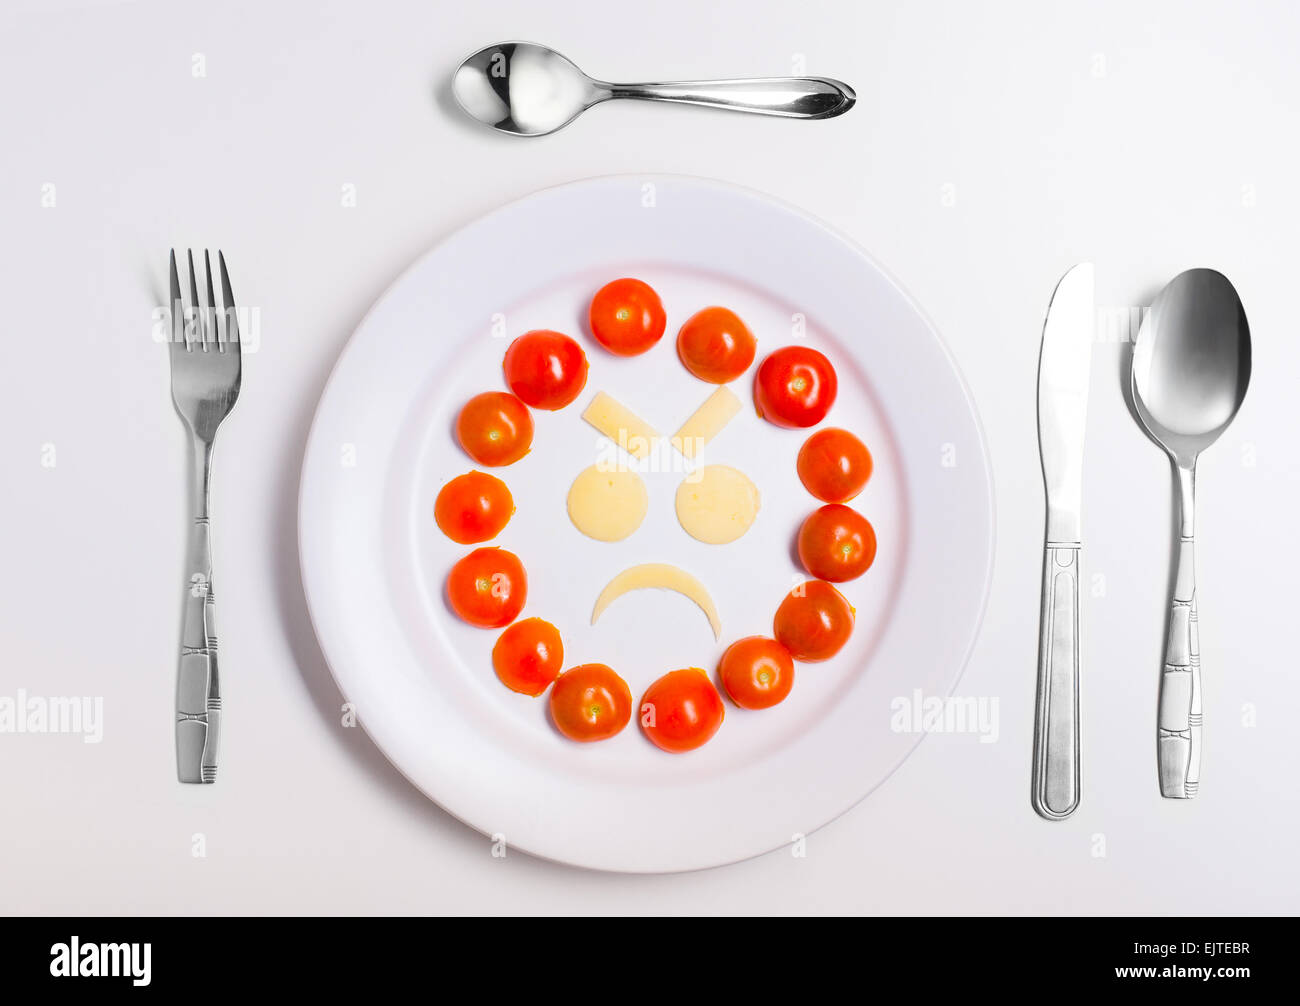 angry emoticon food, made from cheese and tomatoes, on a plate with cutlery, isolated Stock Photo